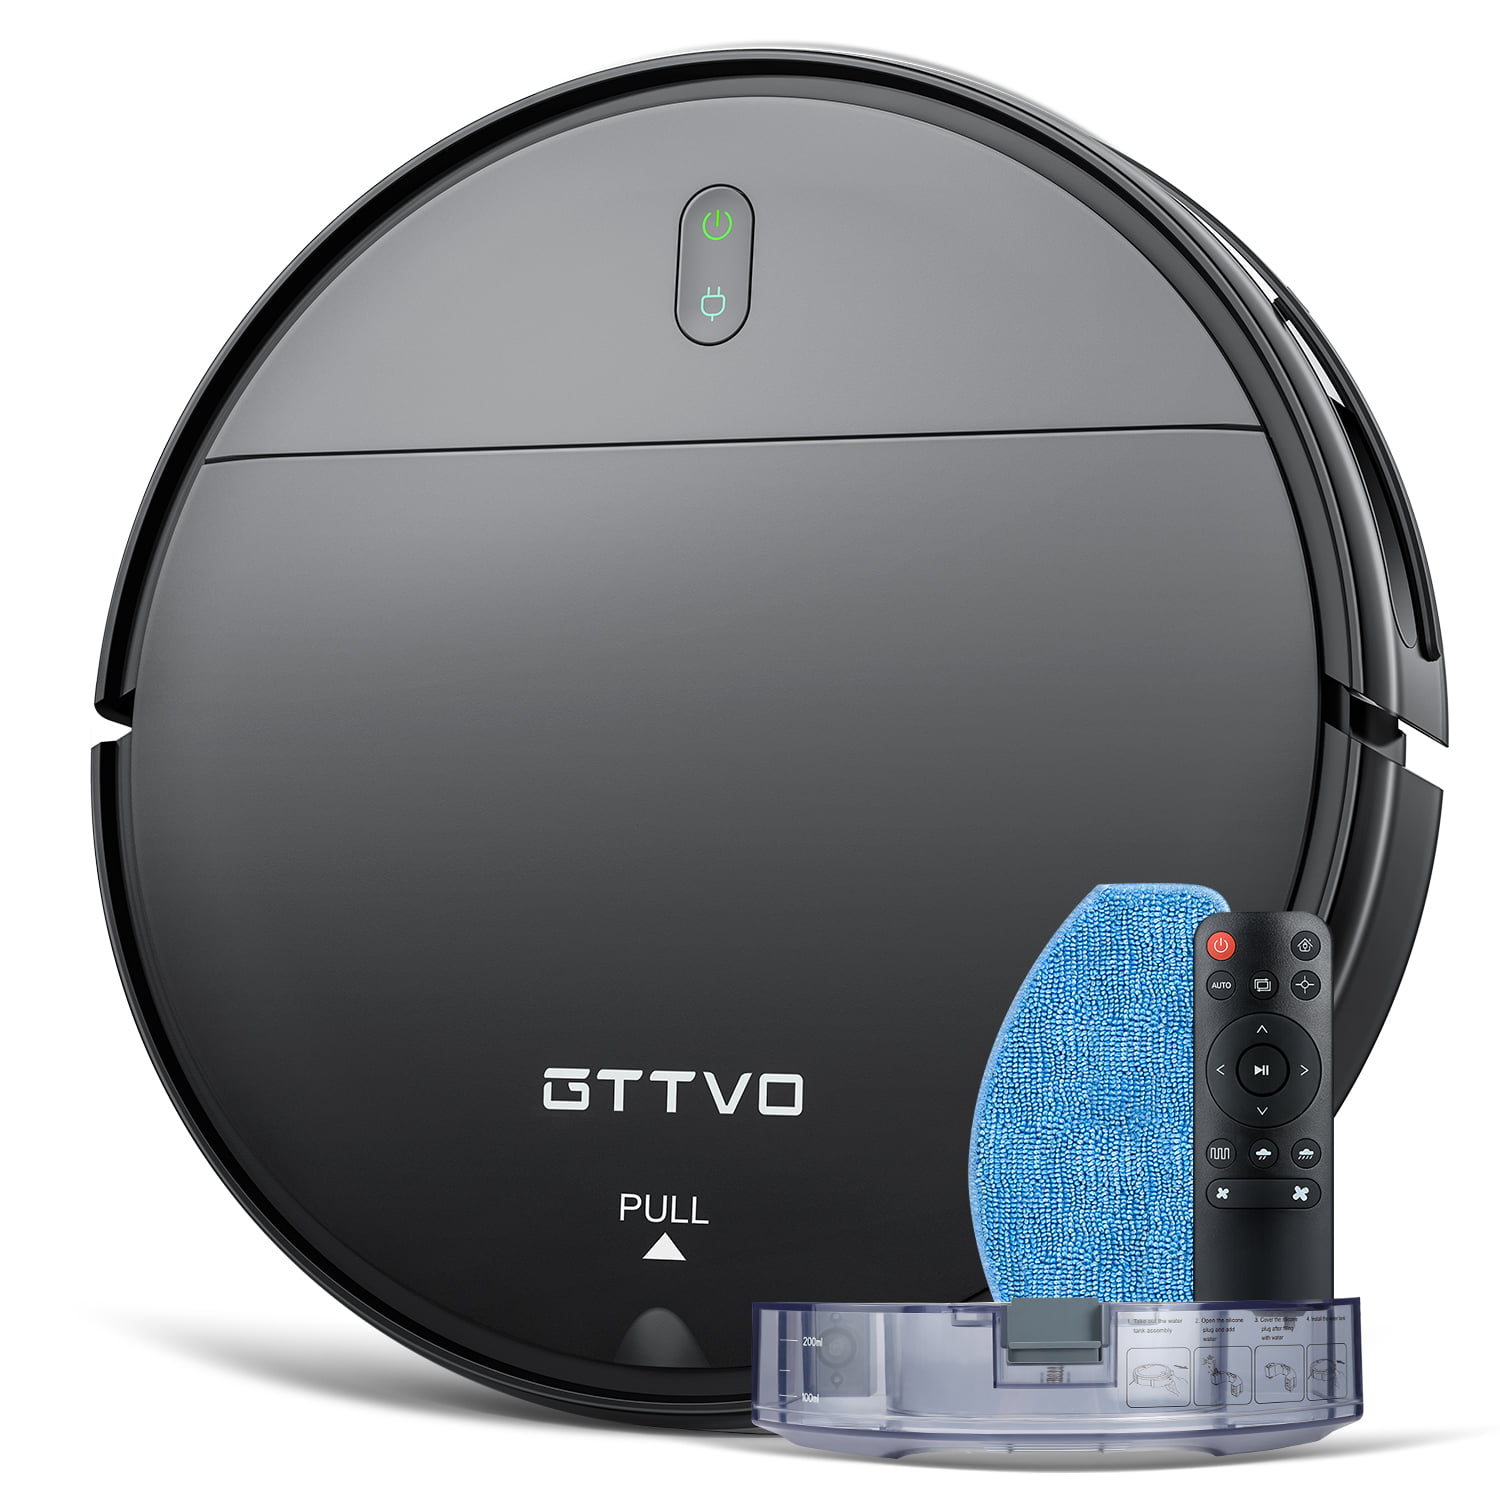 GTTVO Robot Vacuum Cleaner and Mop, BR150 2 in 1 Mopping Robotic Vacuum Combo